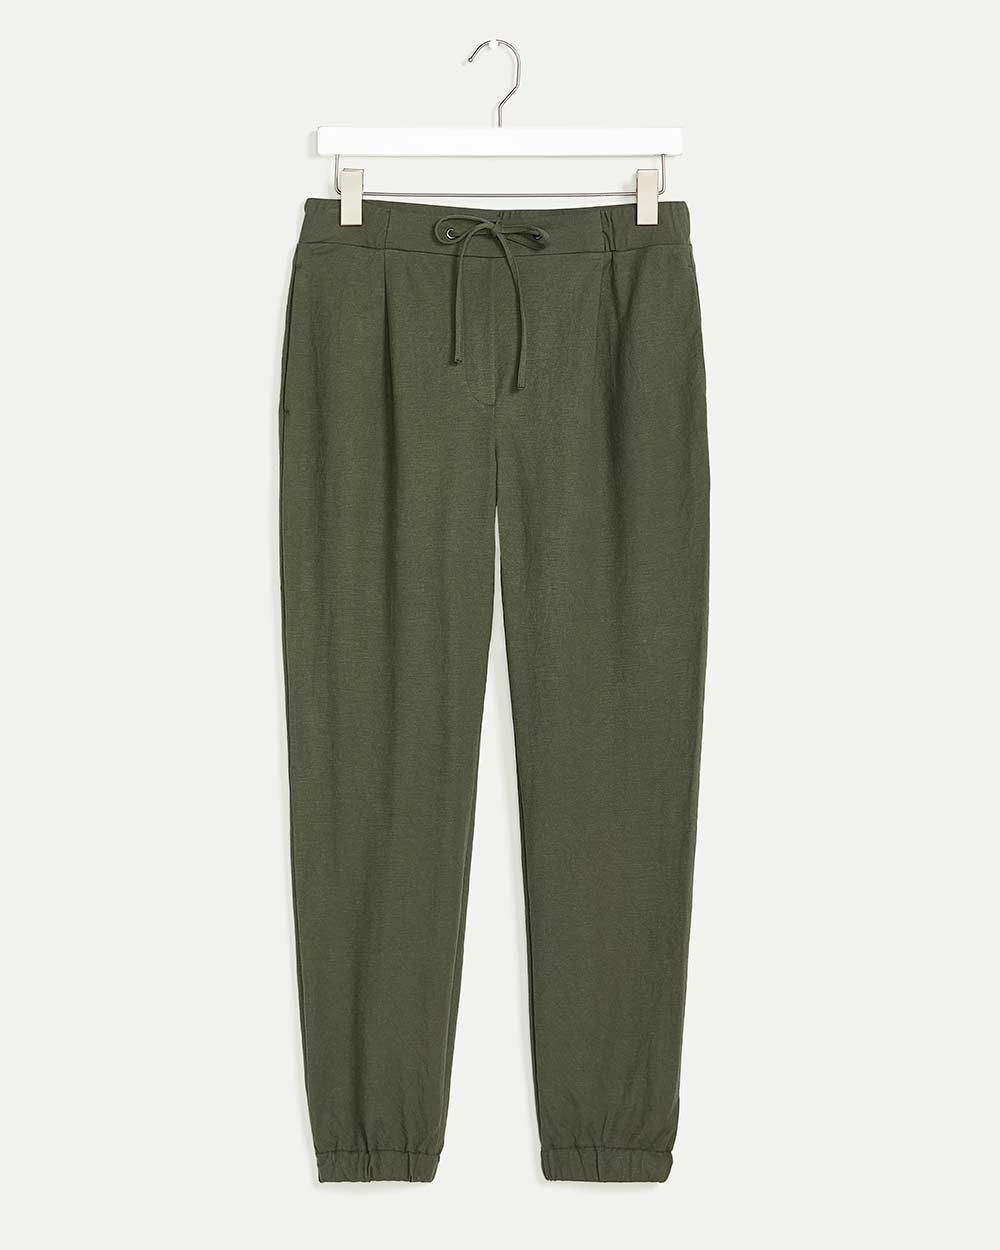 Pull On Knit Pique Jogger Pants